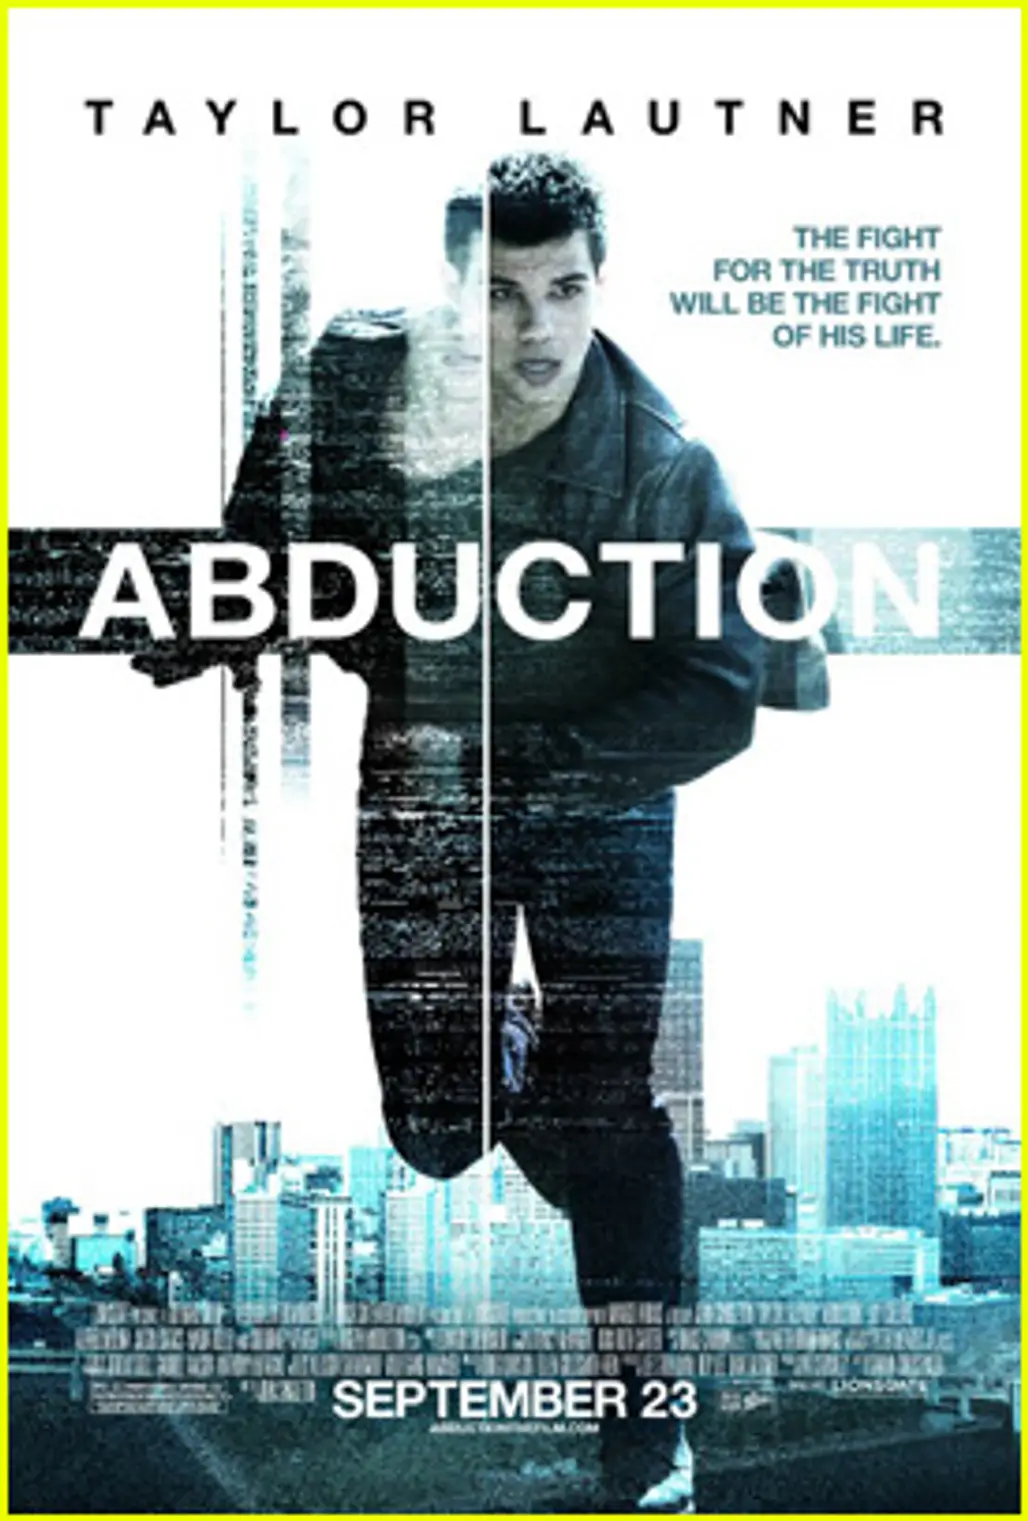 Taylor Lautner's "Abduction" Poster